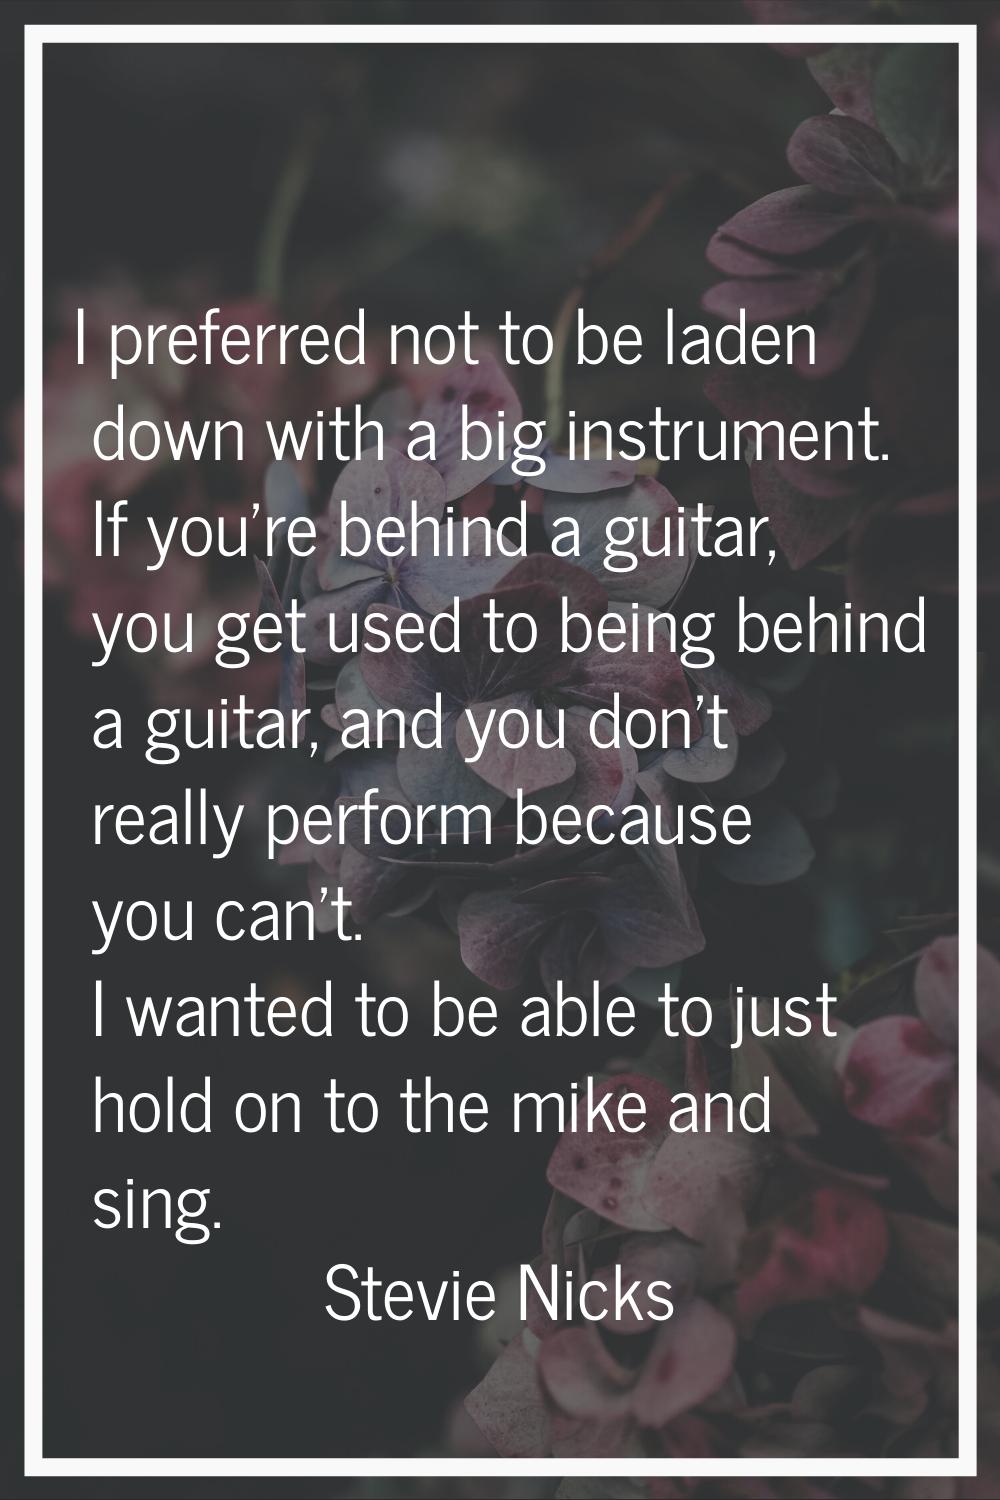 I preferred not to be laden down with a big instrument. If you're behind a guitar, you get used to 